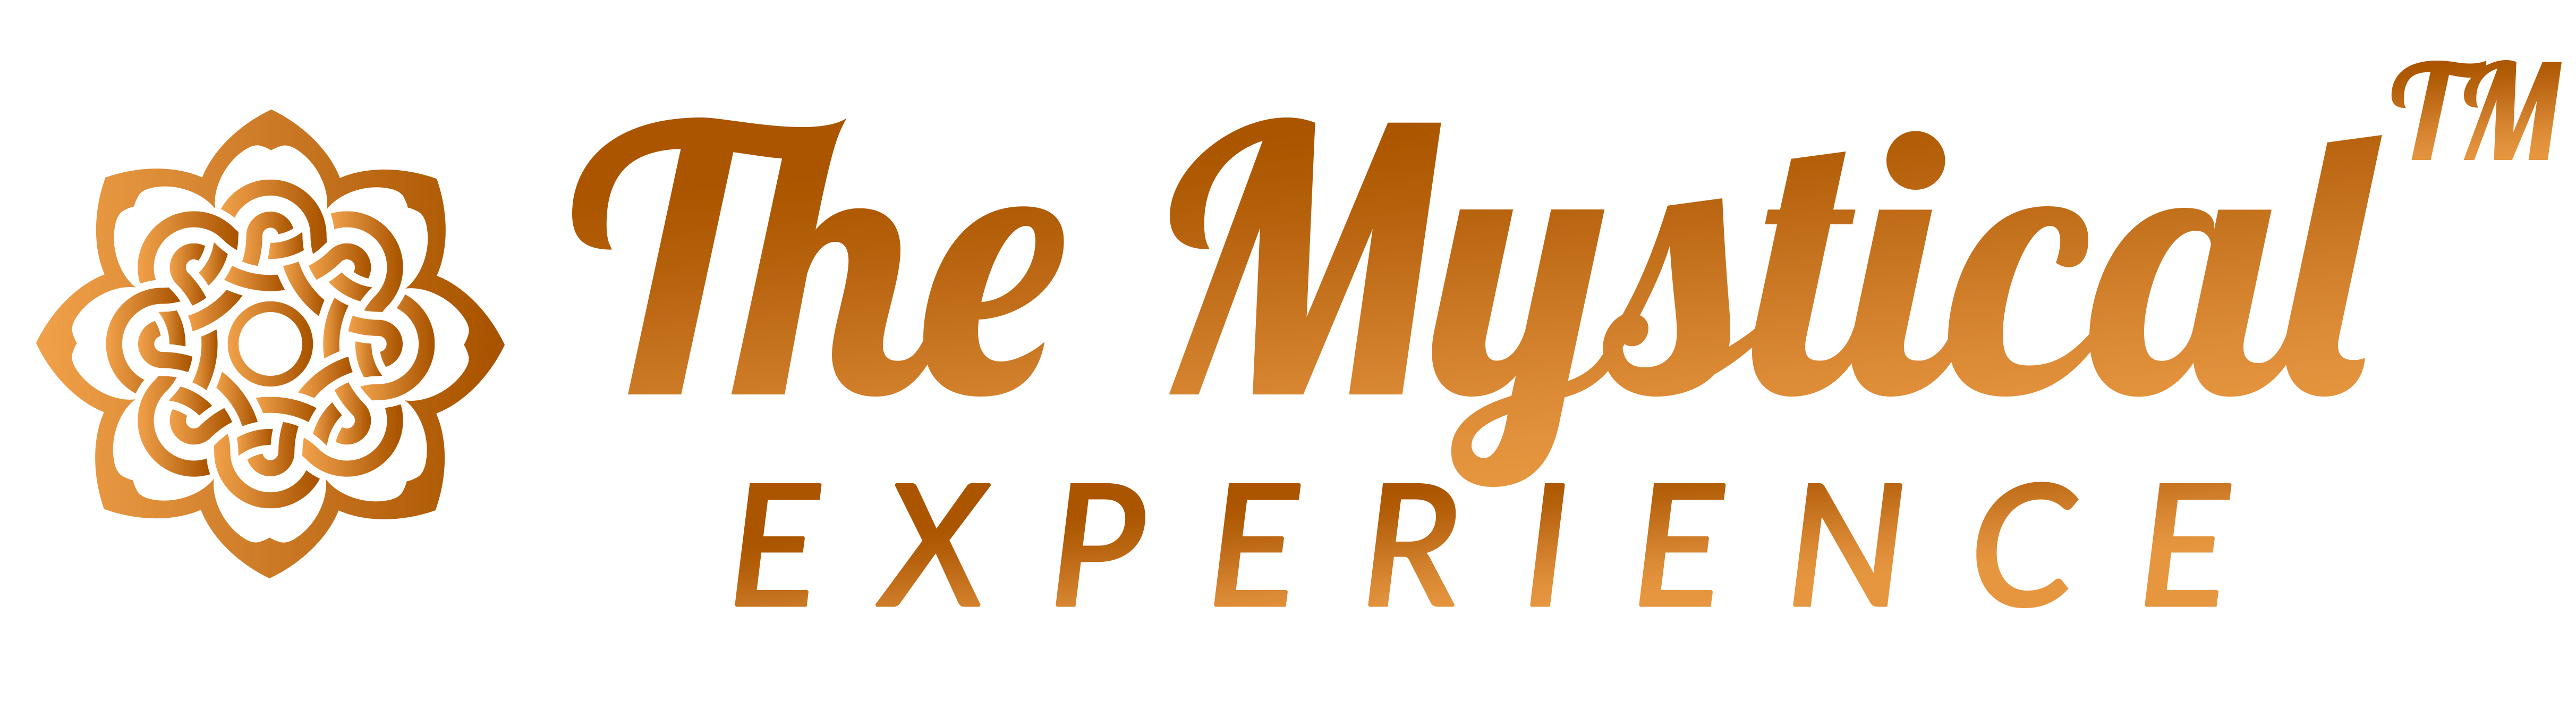 The Mystical Experience